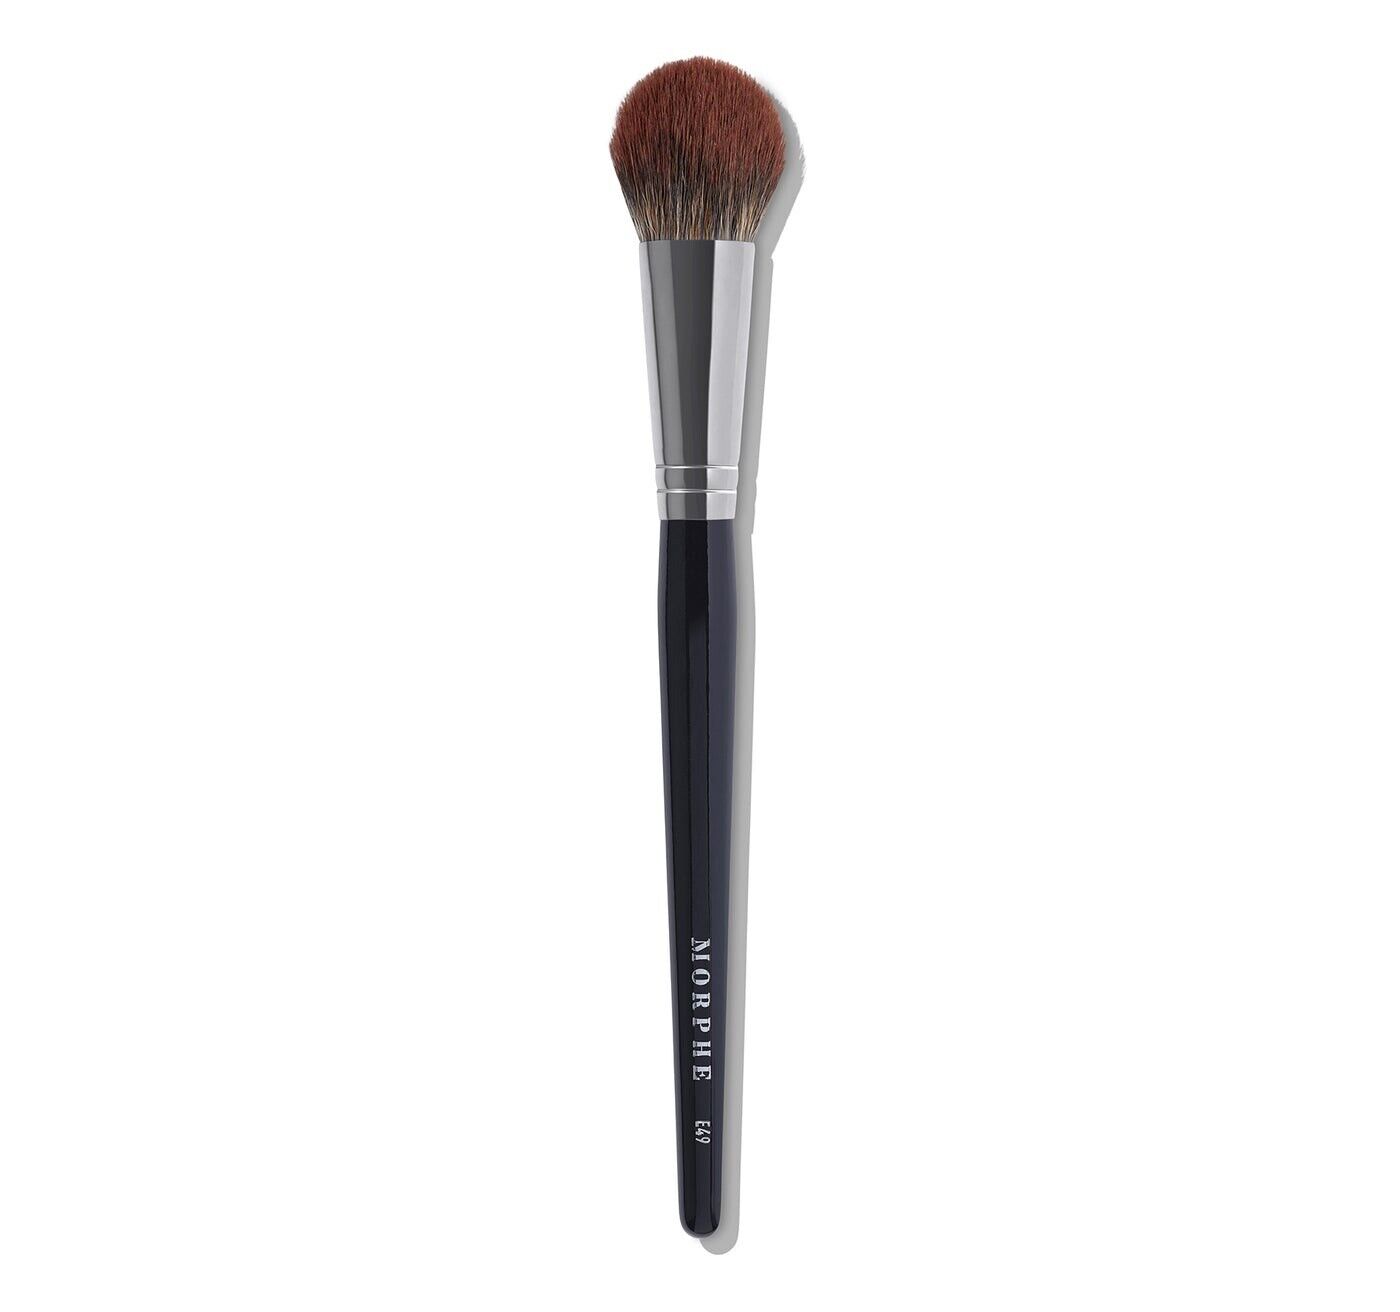 MORPHEE49 - FLAT POINTED POWDER New.￼ Max 85% OFF 55% OFF BRUSH. Brand